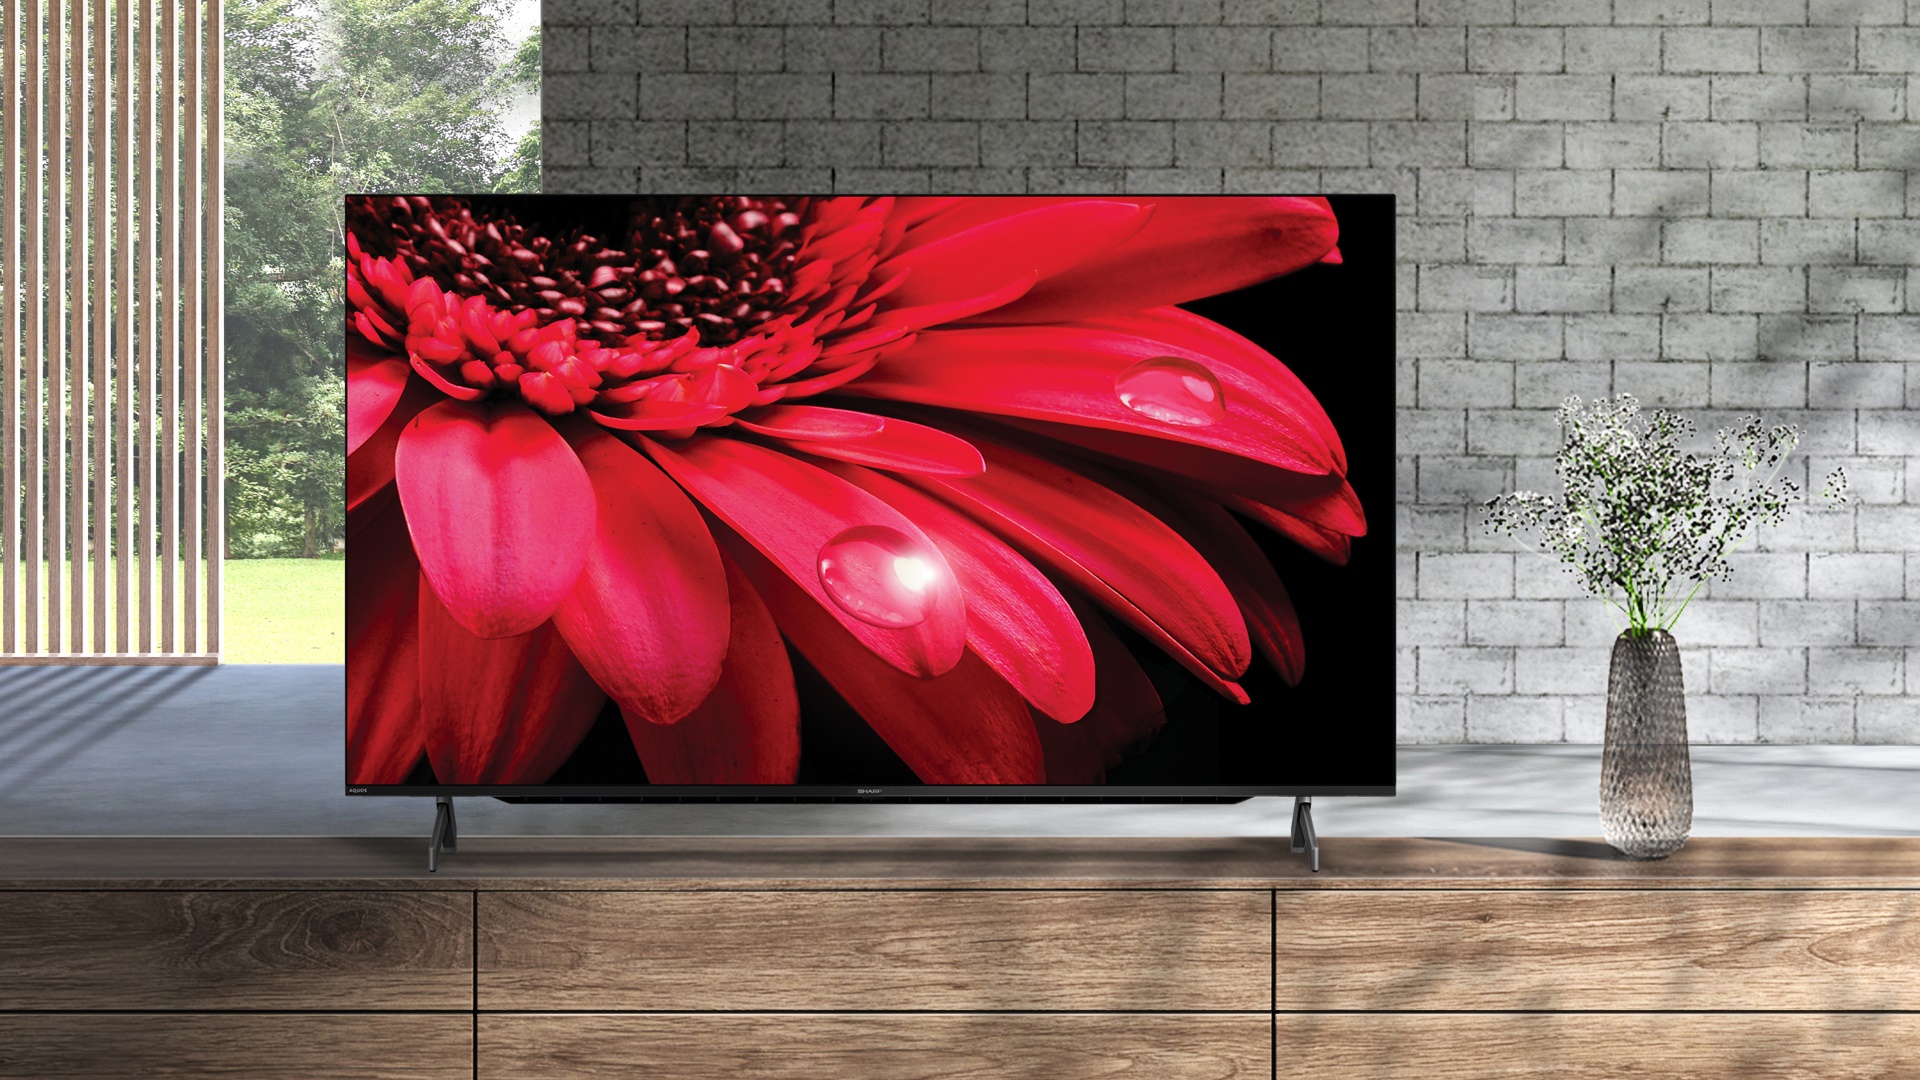 LG unveils QNED 83 series smart TVs in India: Know price, features and more